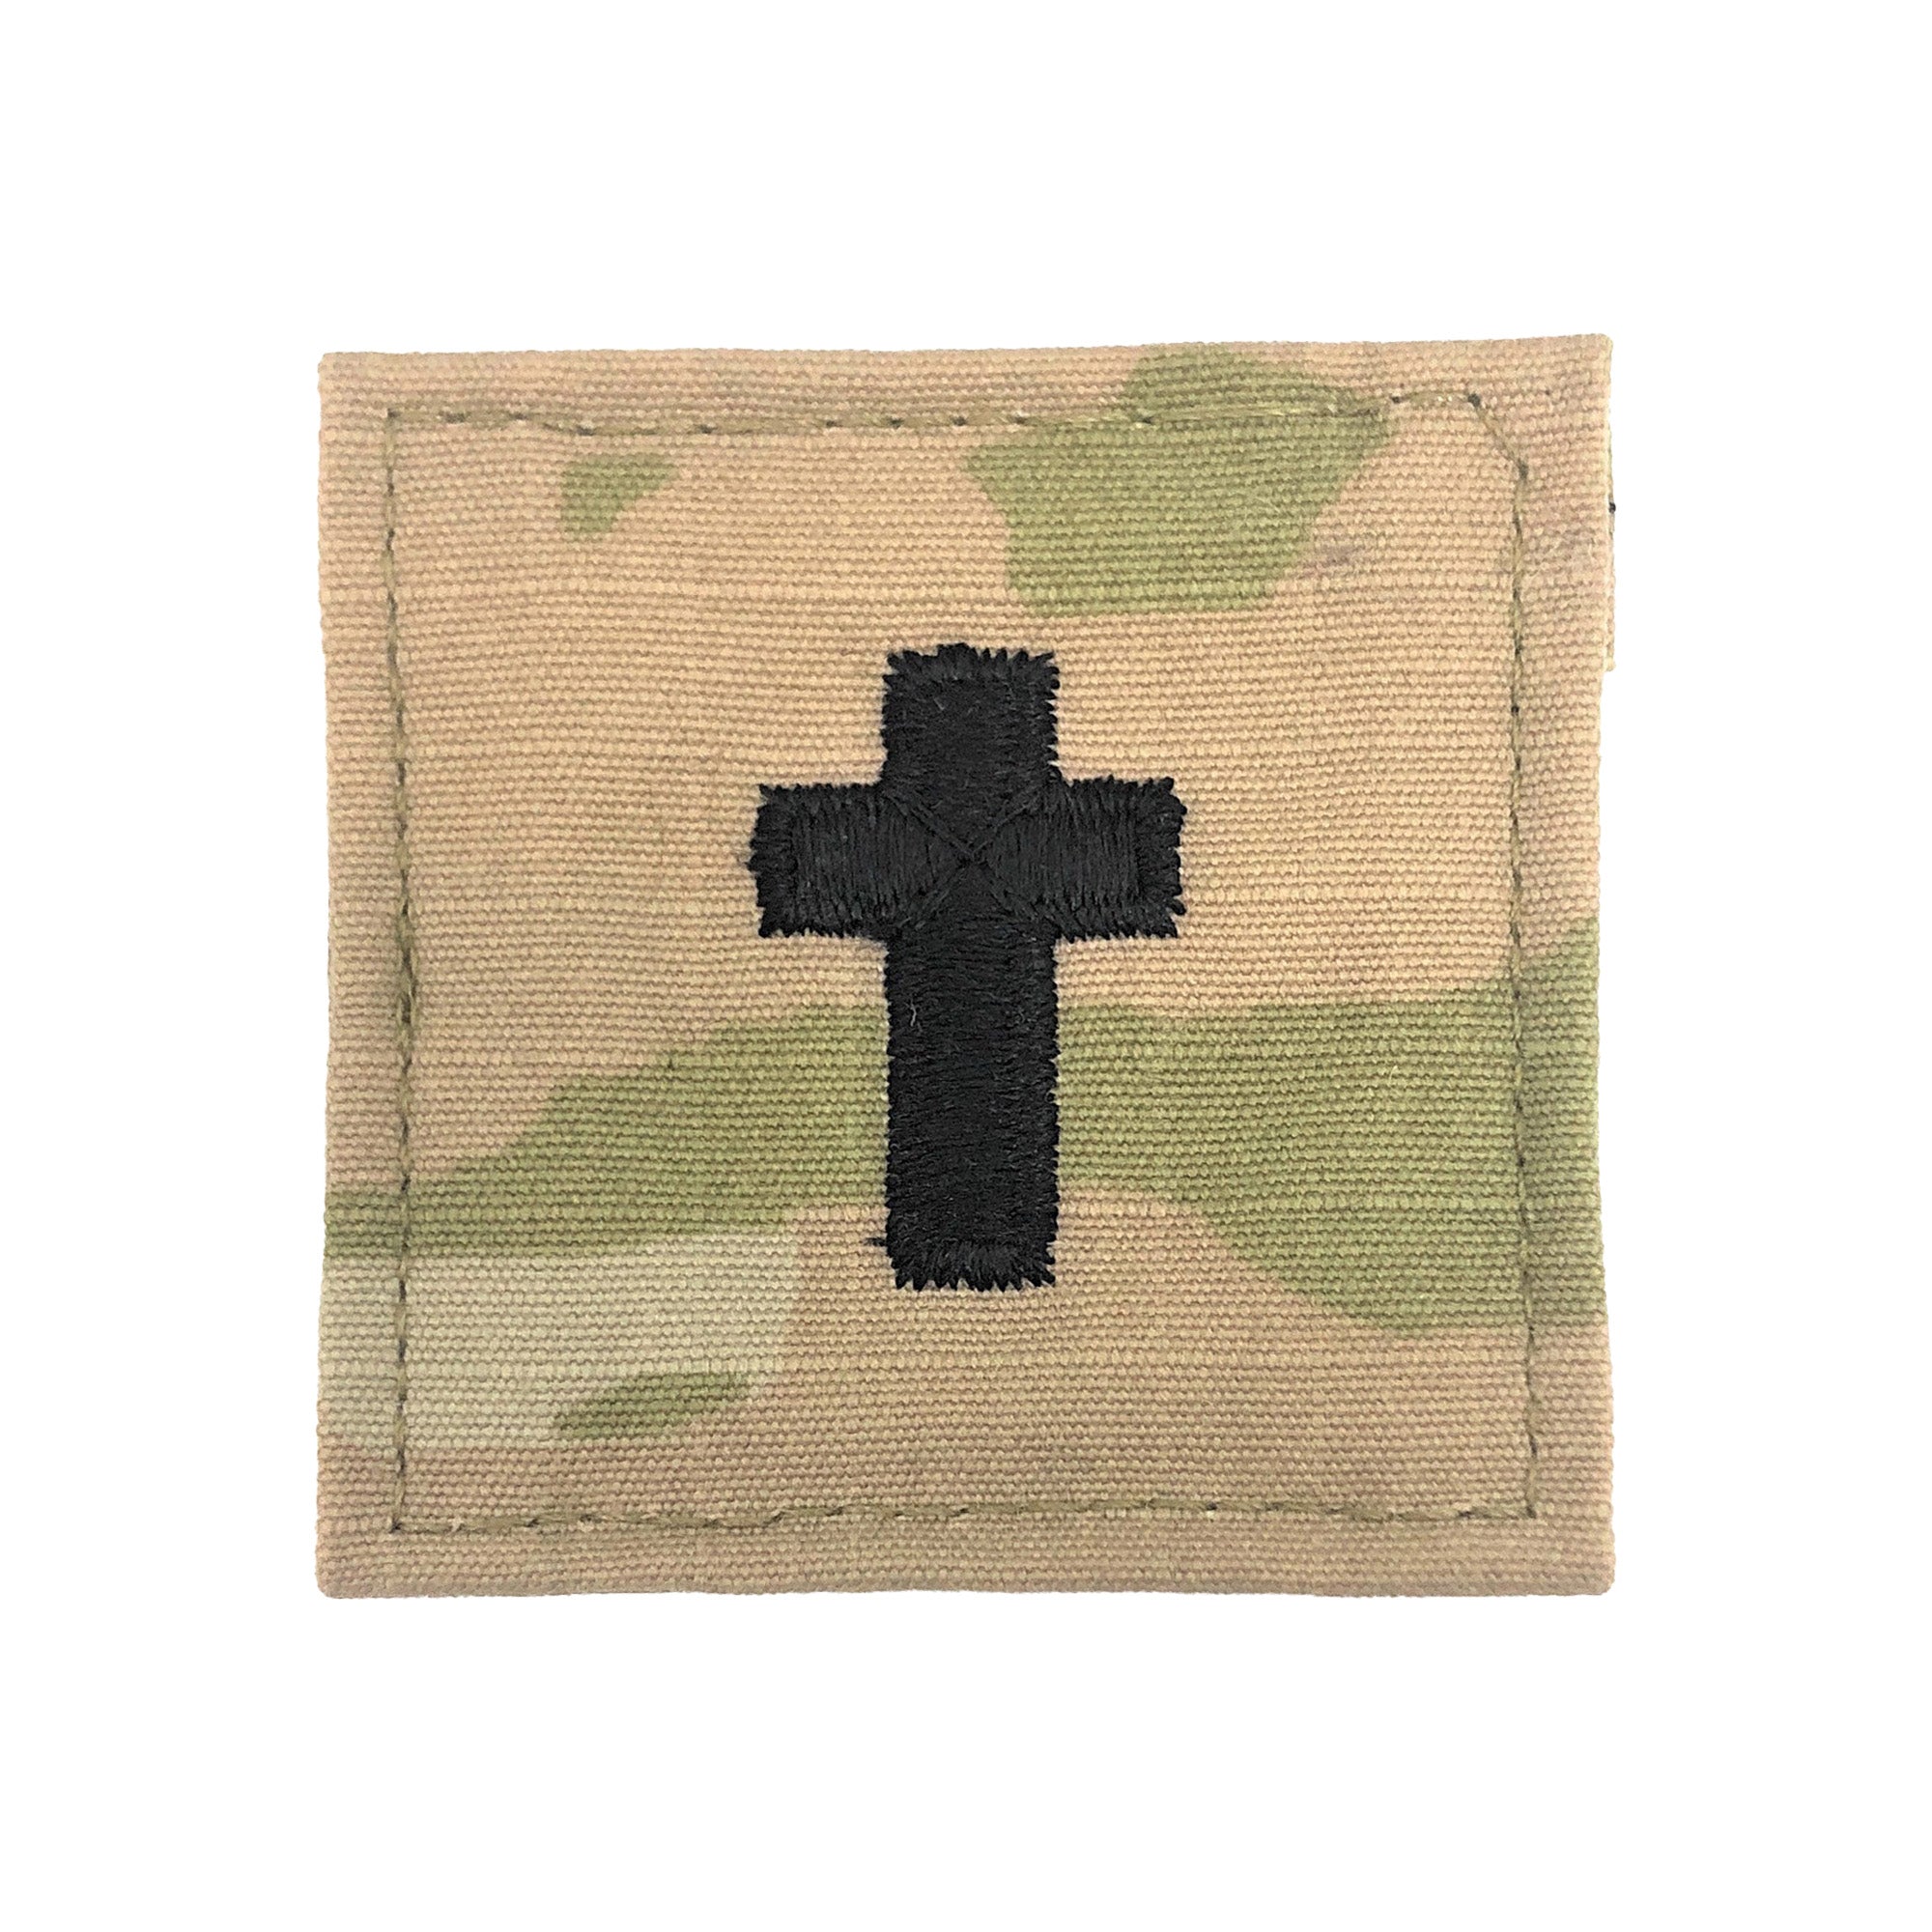 Chaplain Christian OCP With Hook Fastener - Insignia Depot